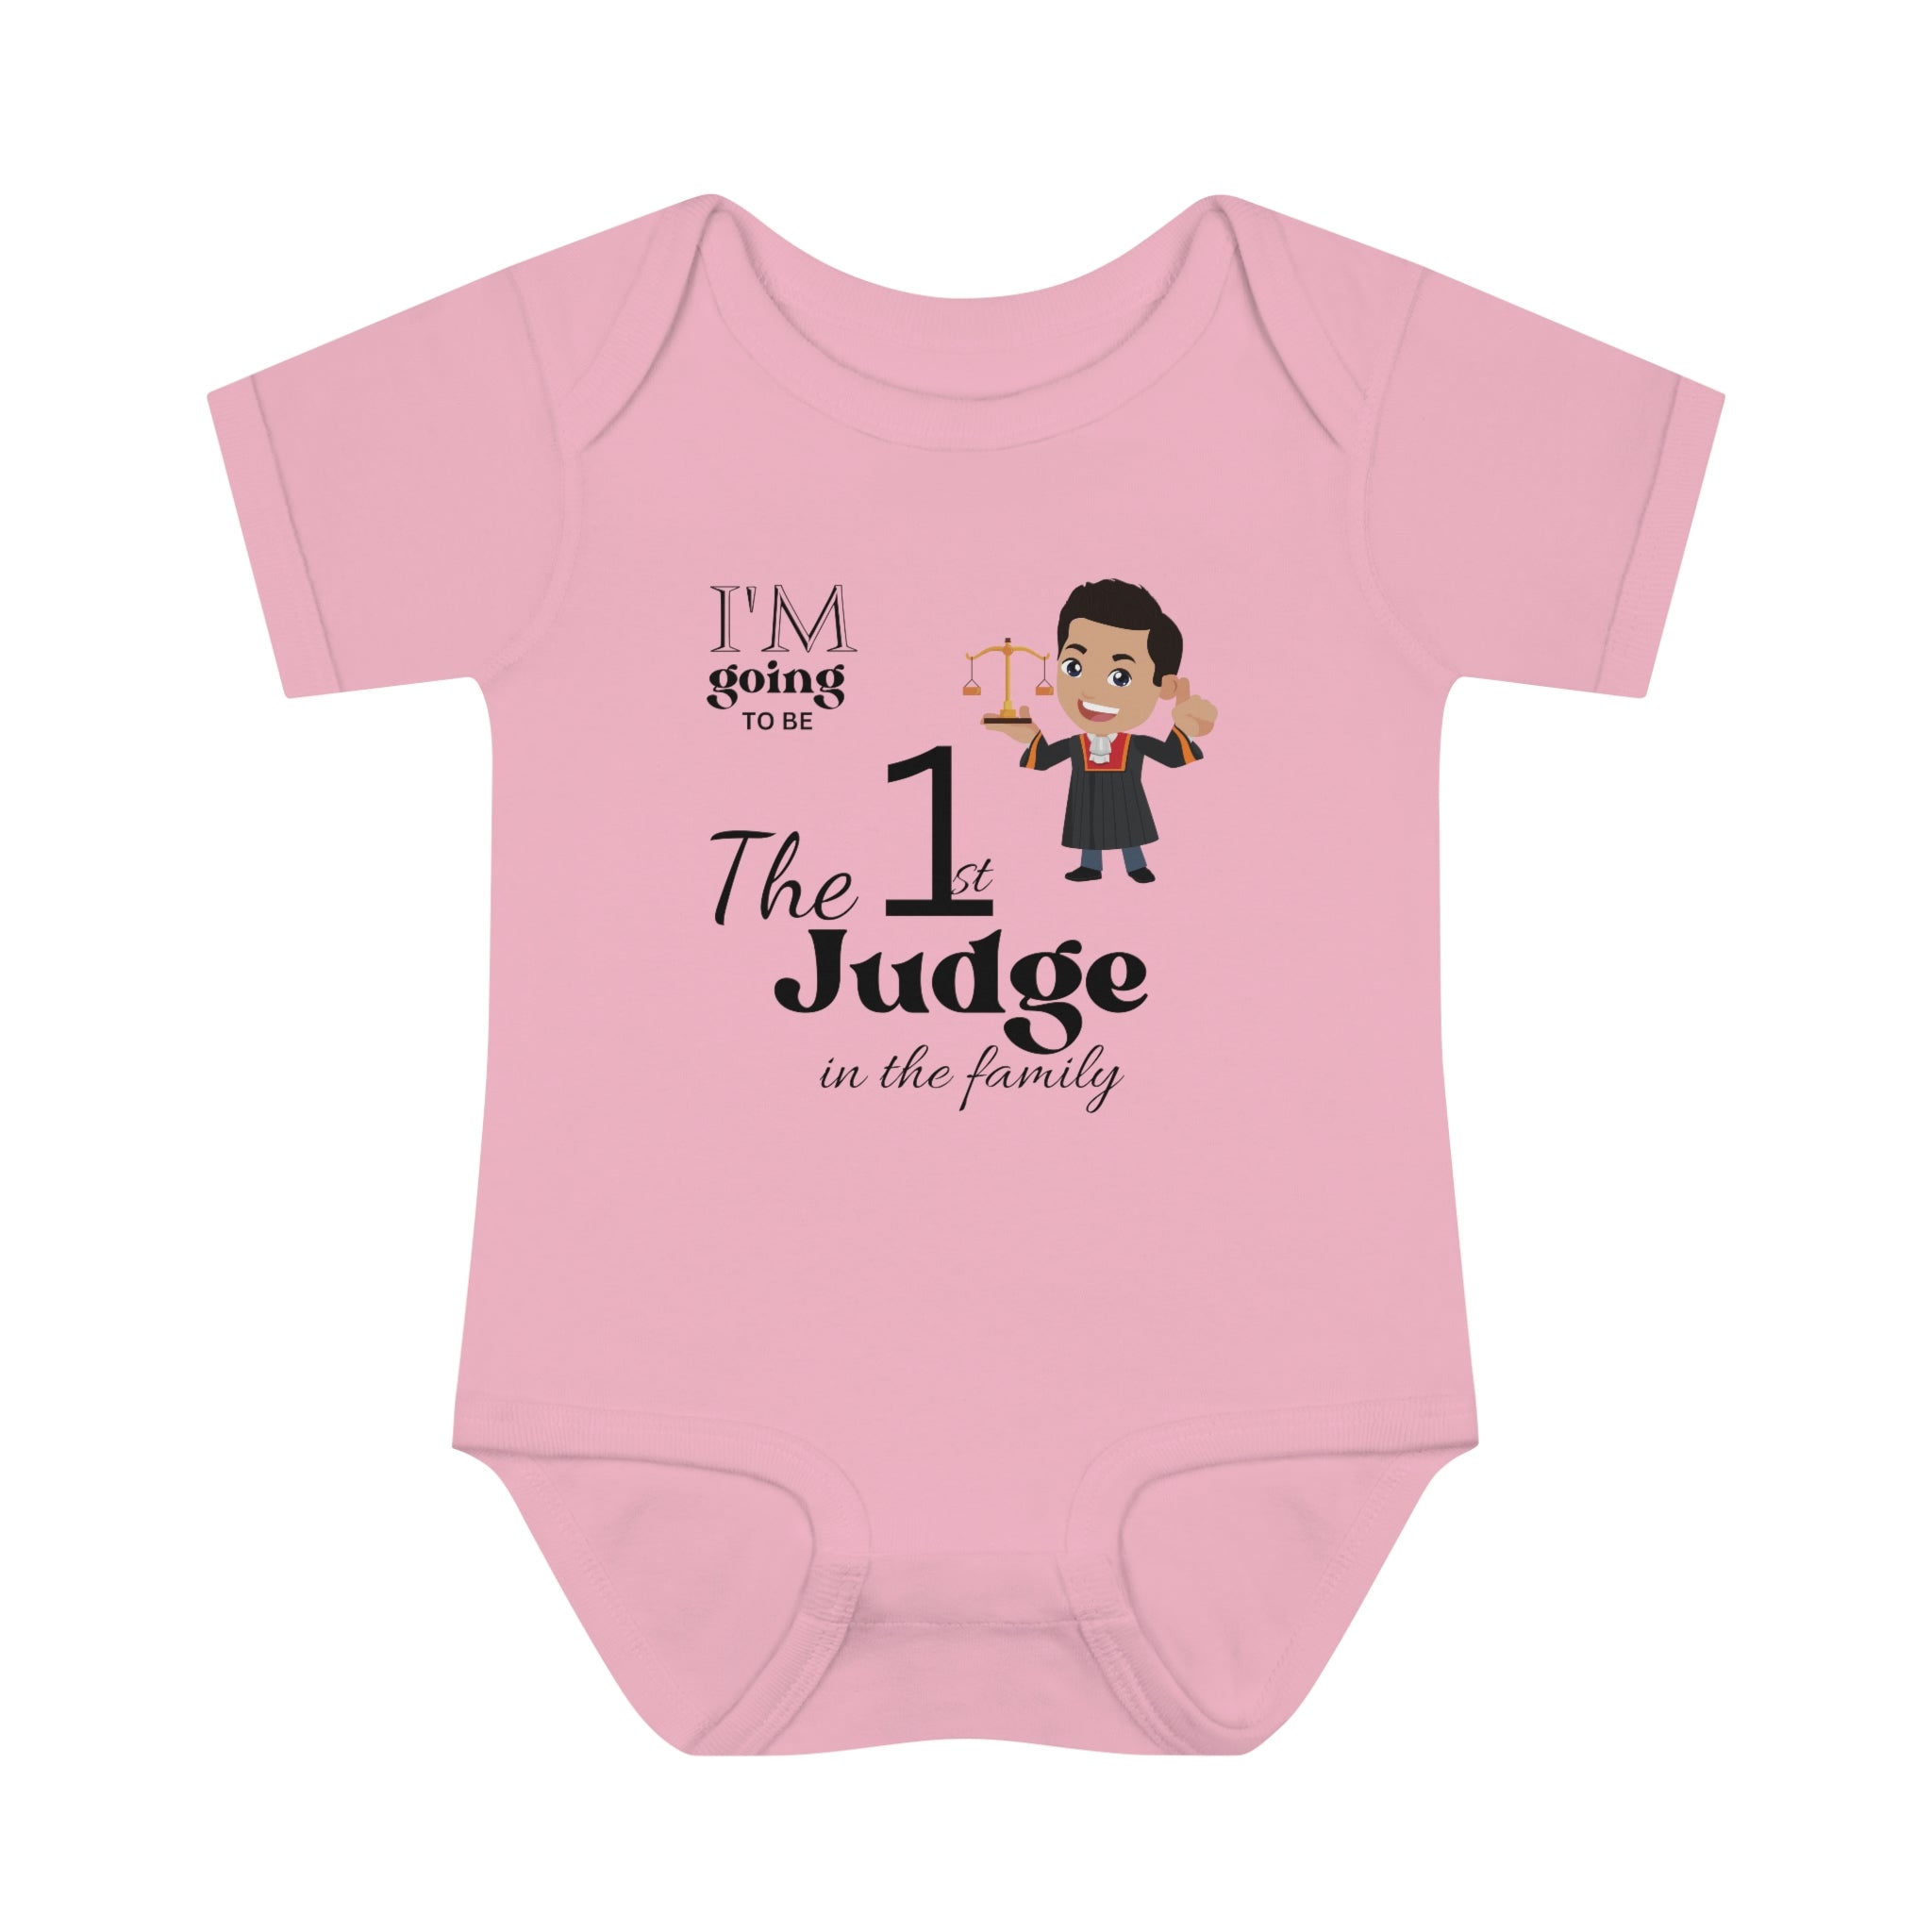 The 1st Judge In The Family Baby Bodysuit